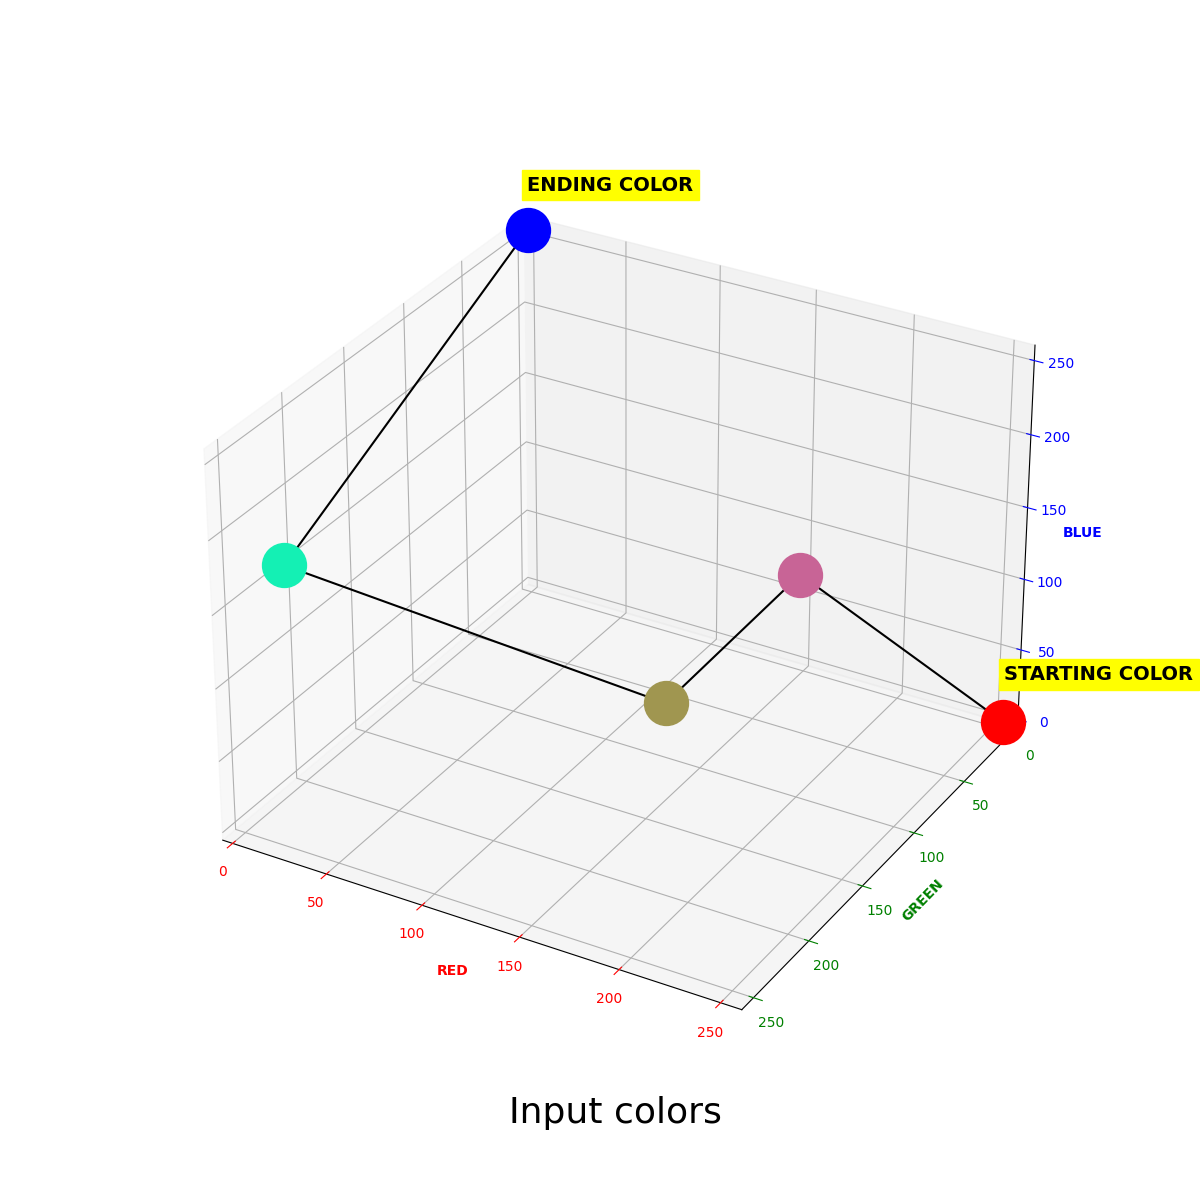 All input colors of the previous example placed as points on a 3D plan